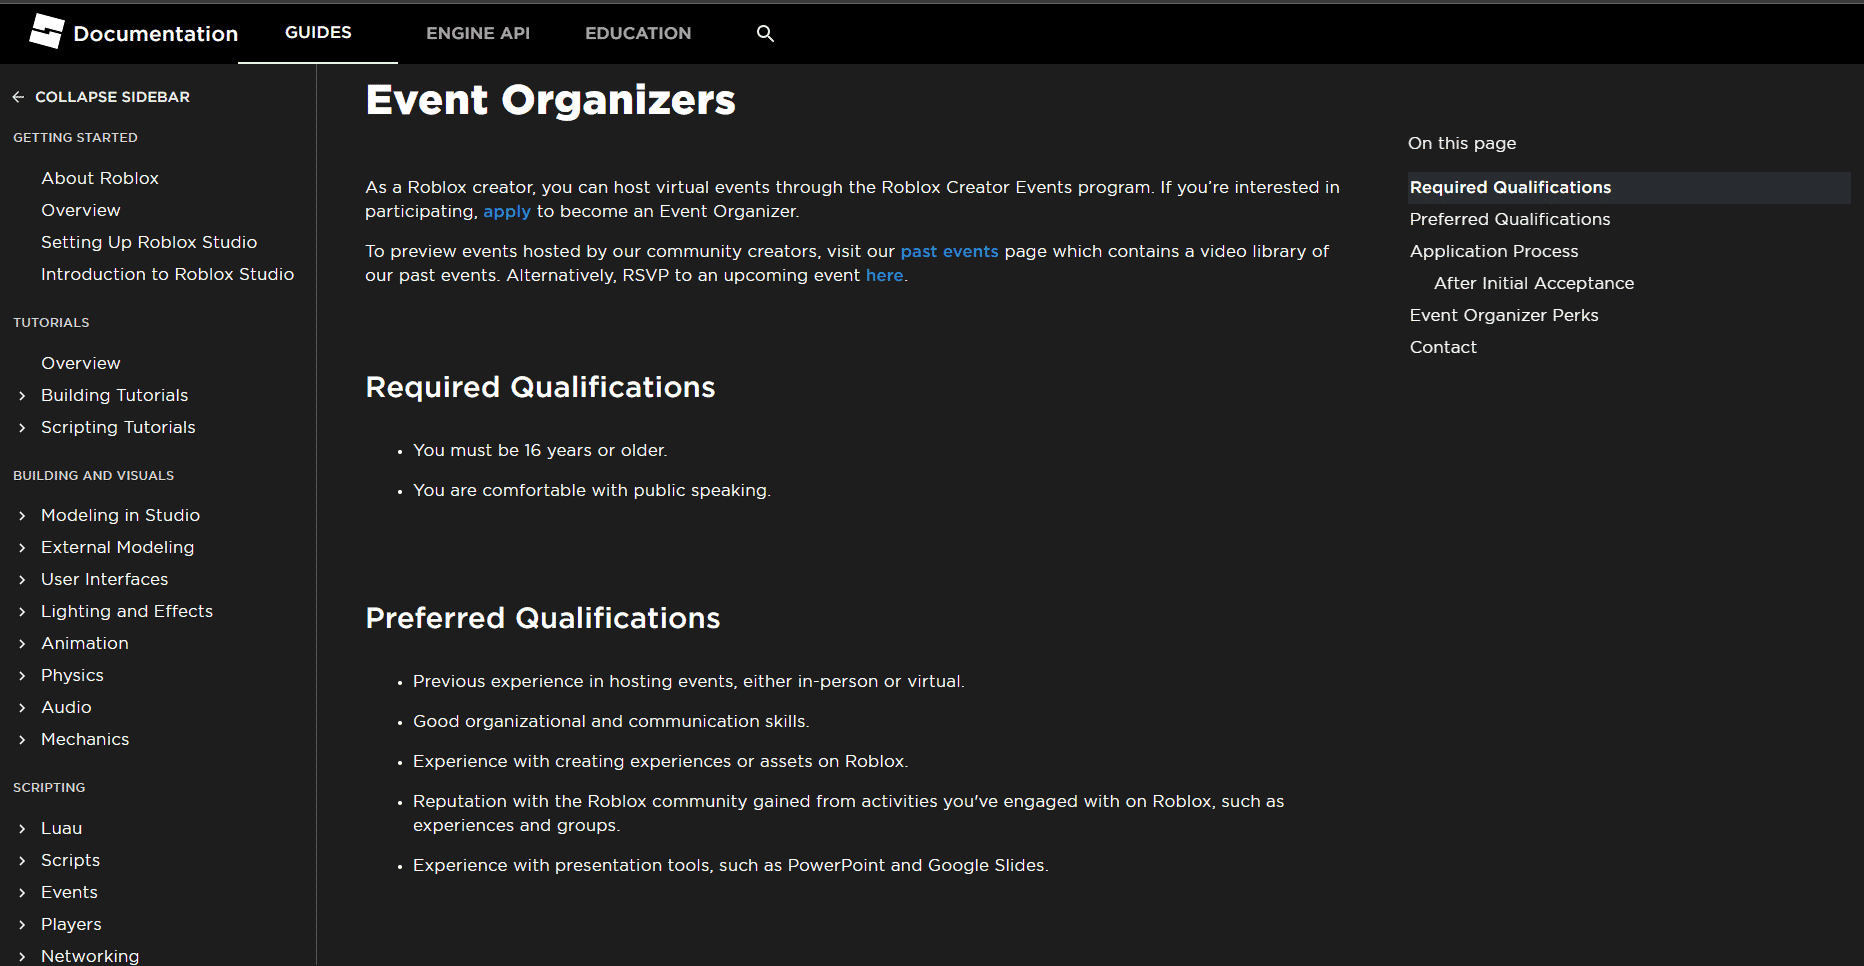 roblox event organizers documentation page